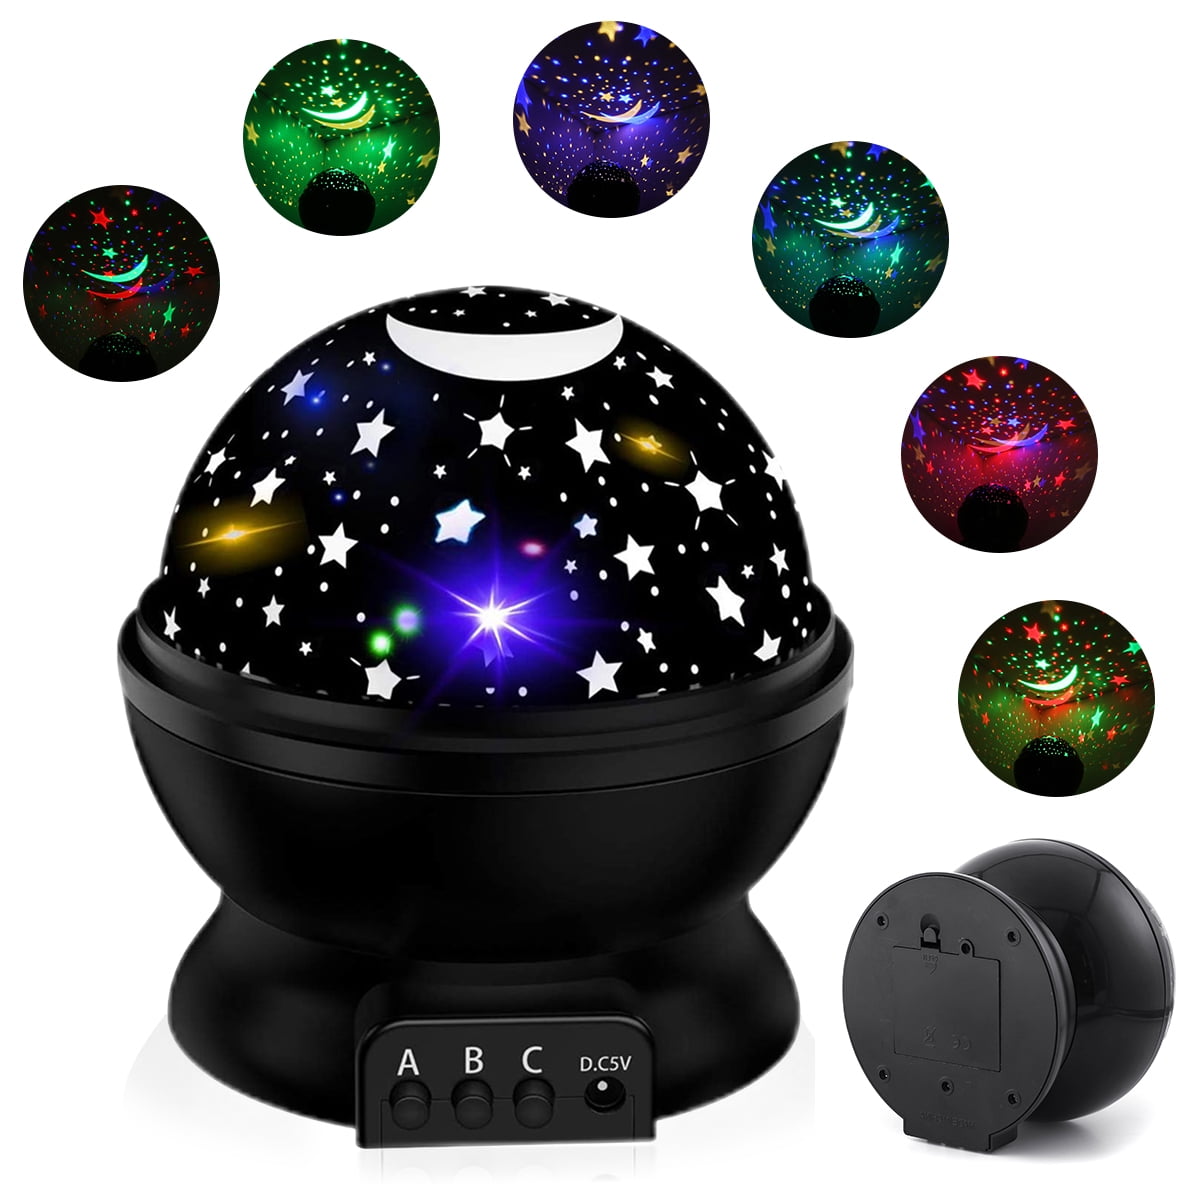 Details about   Galaxy Astronaut Led Night Light Nursery Lamp Table Decorative Light Kids Toy 